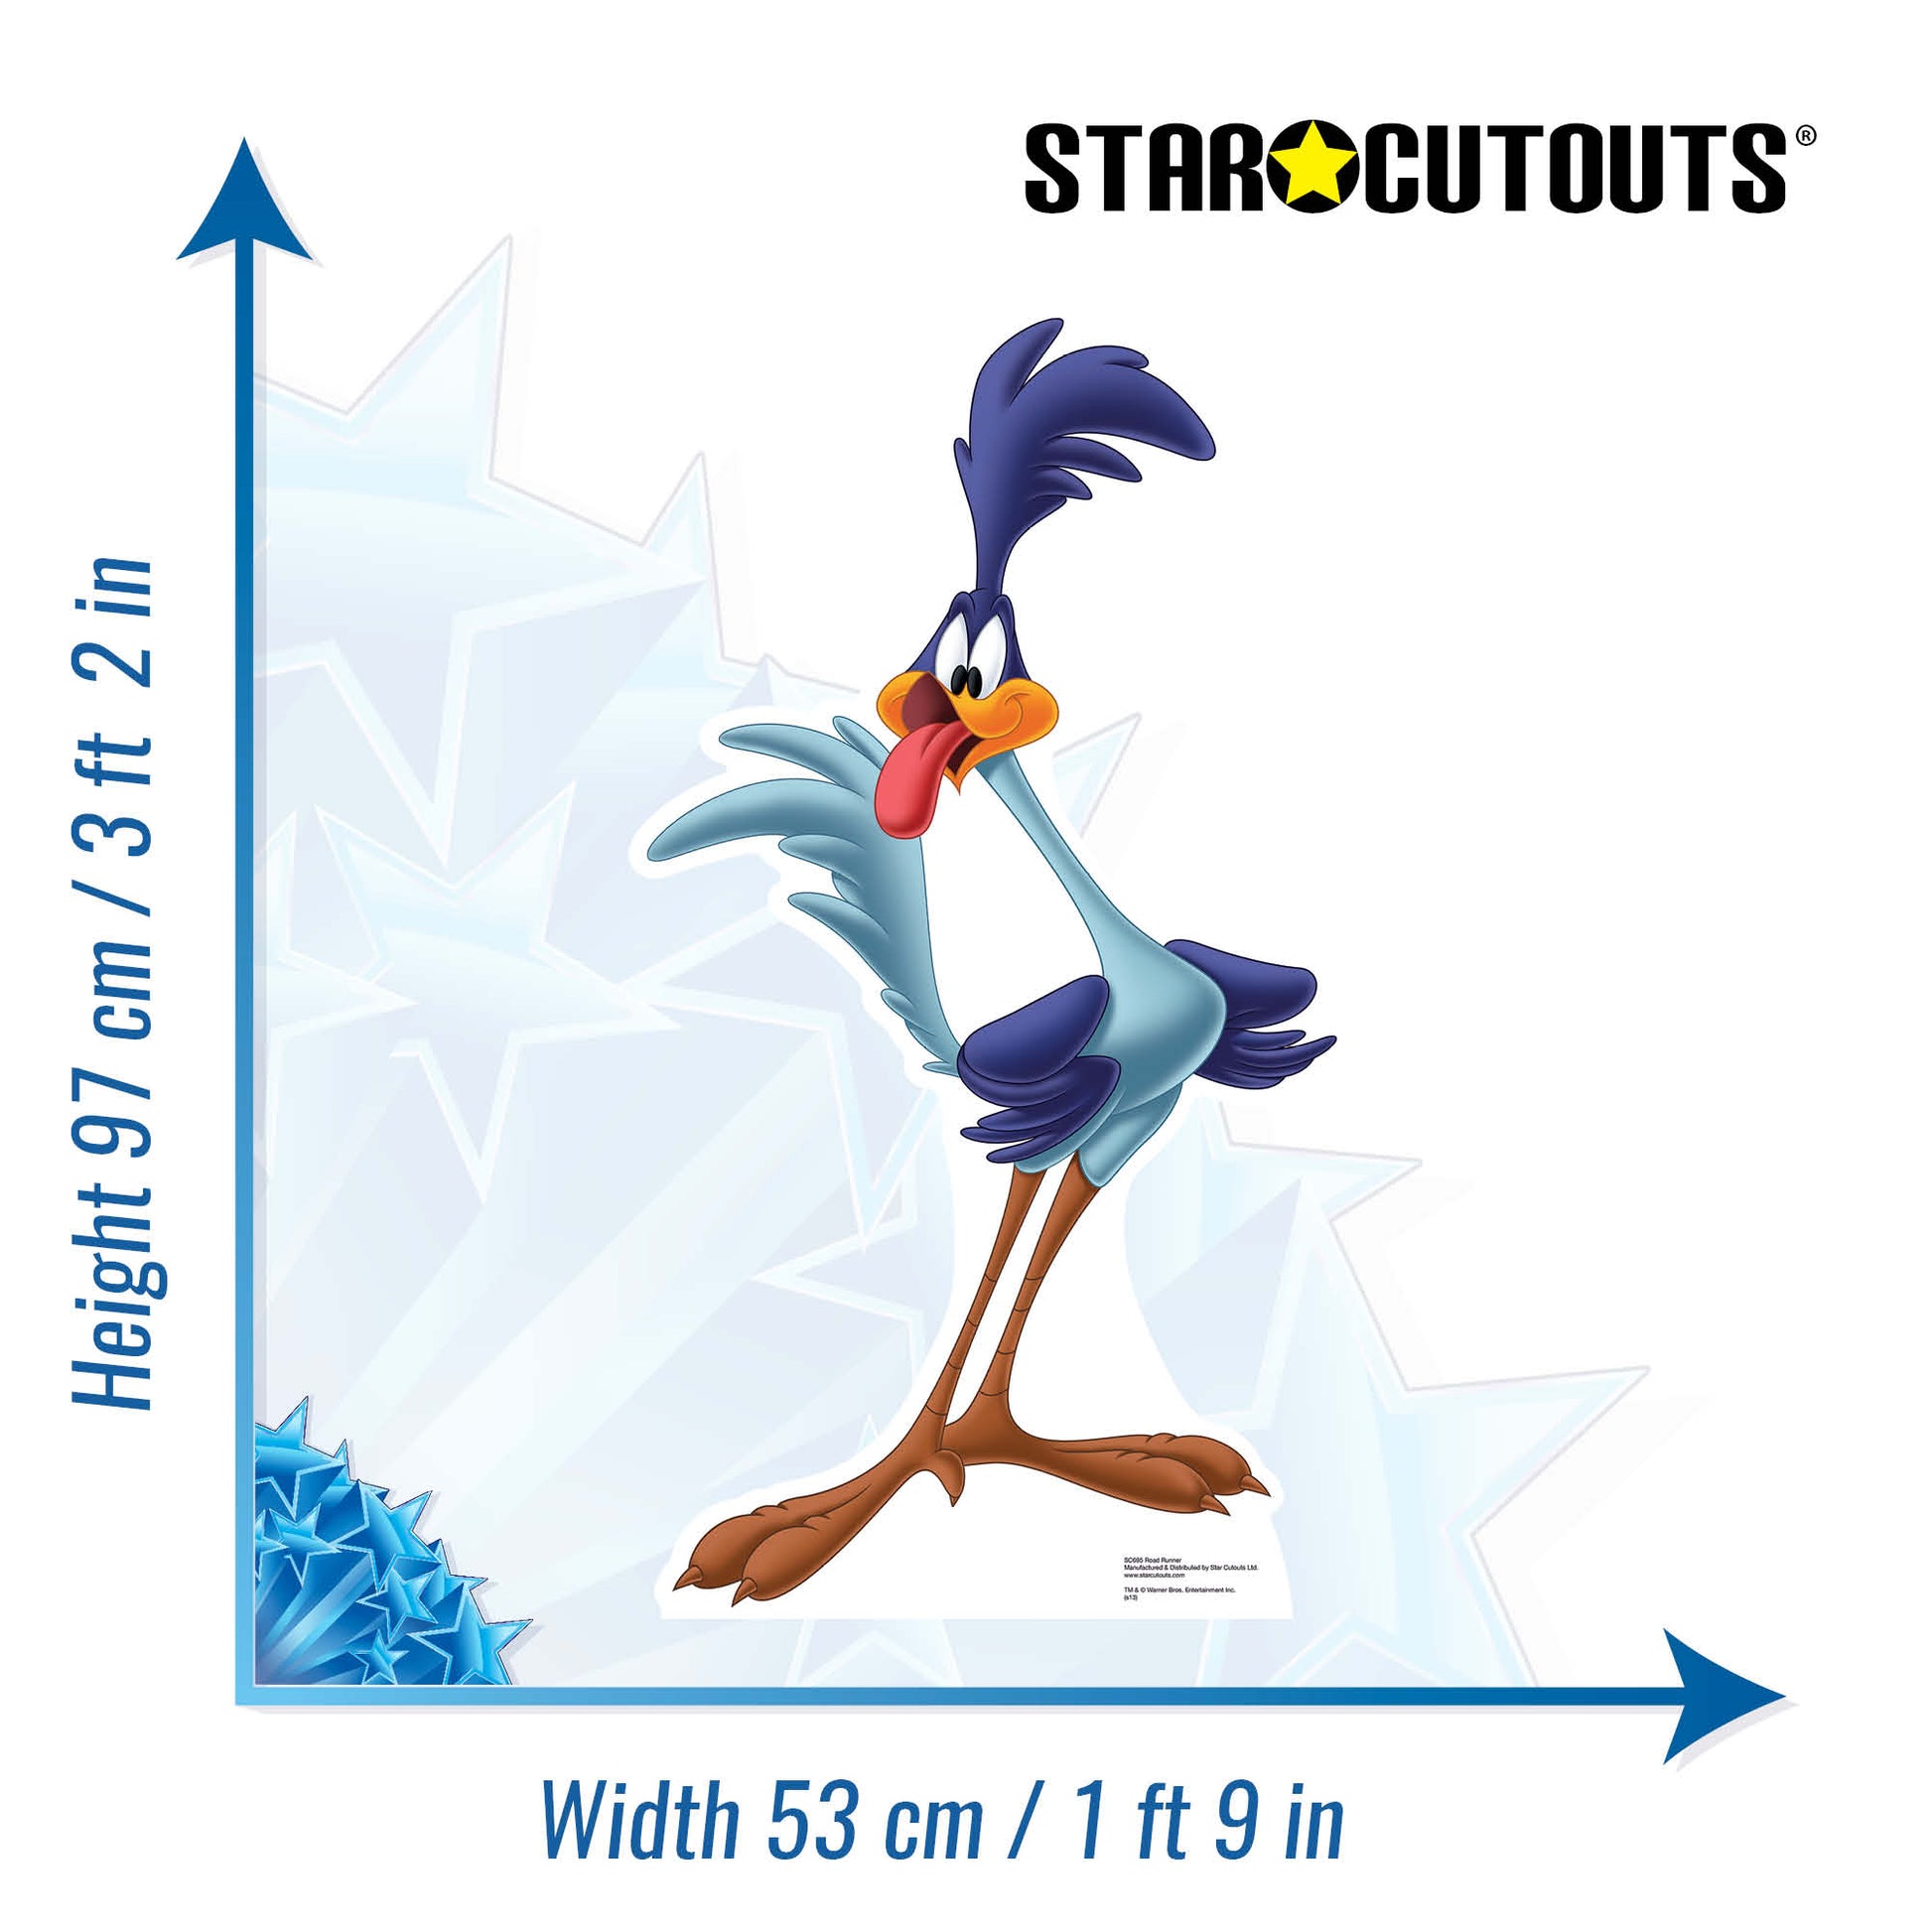 Road Runner and Wile E Coyote Cardboard Cutout / Standee / Standup Double  Pack. Buy Looney Tunes Cardboard Cutouts at